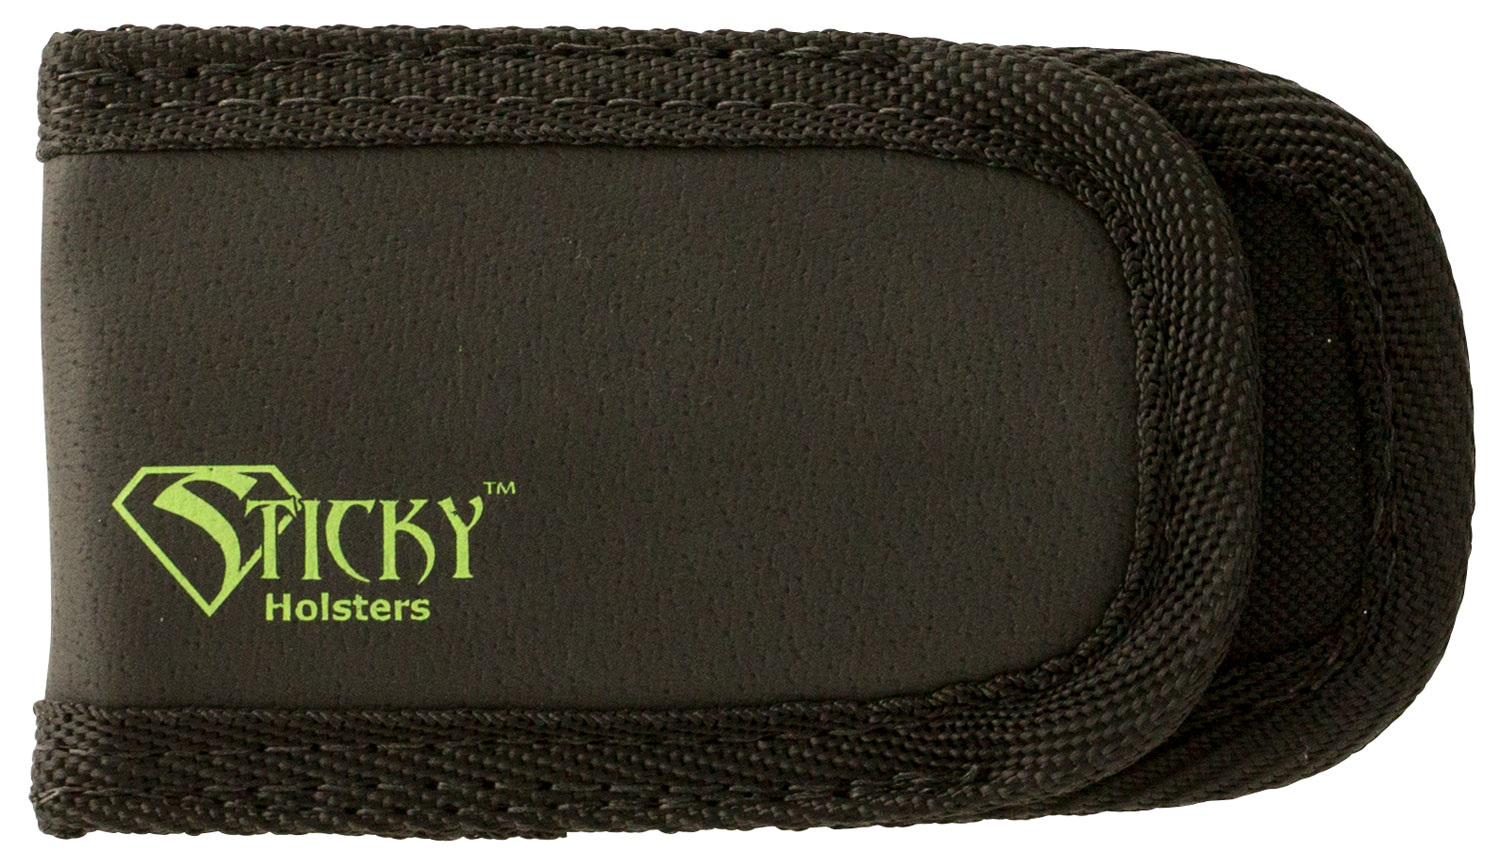 STICKY MAG POUCH SLEEVE